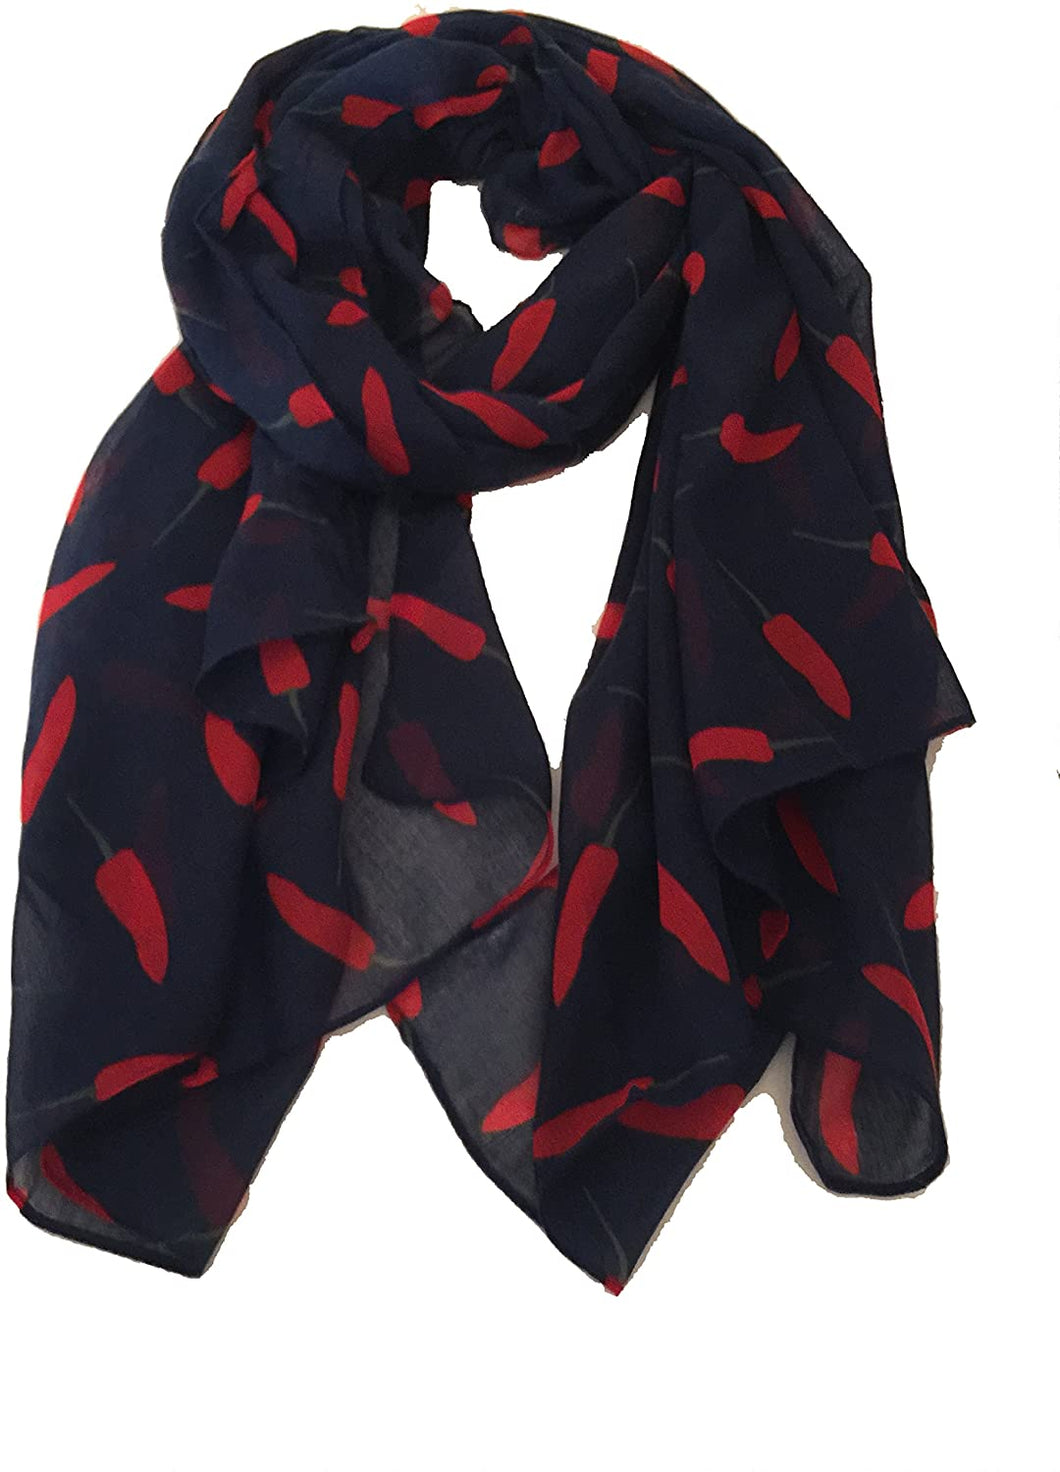 Pamper Yourself Now Navy Blue with red Small Chilli Pepper Design Scarf.